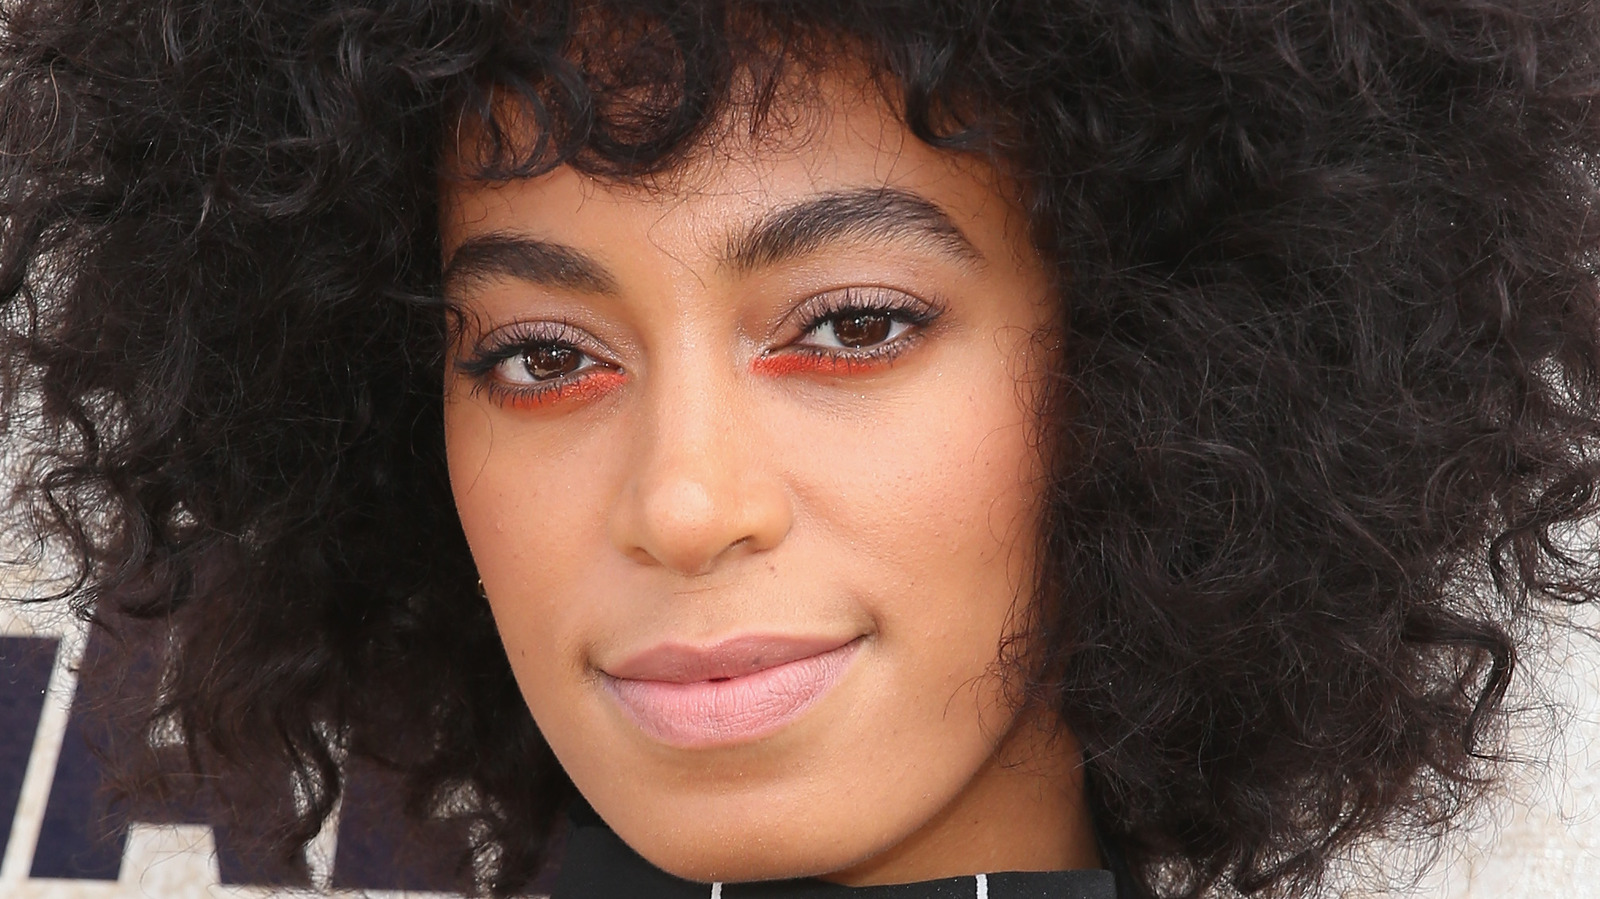 The Drugstore Beauty Product That Solange Swears By